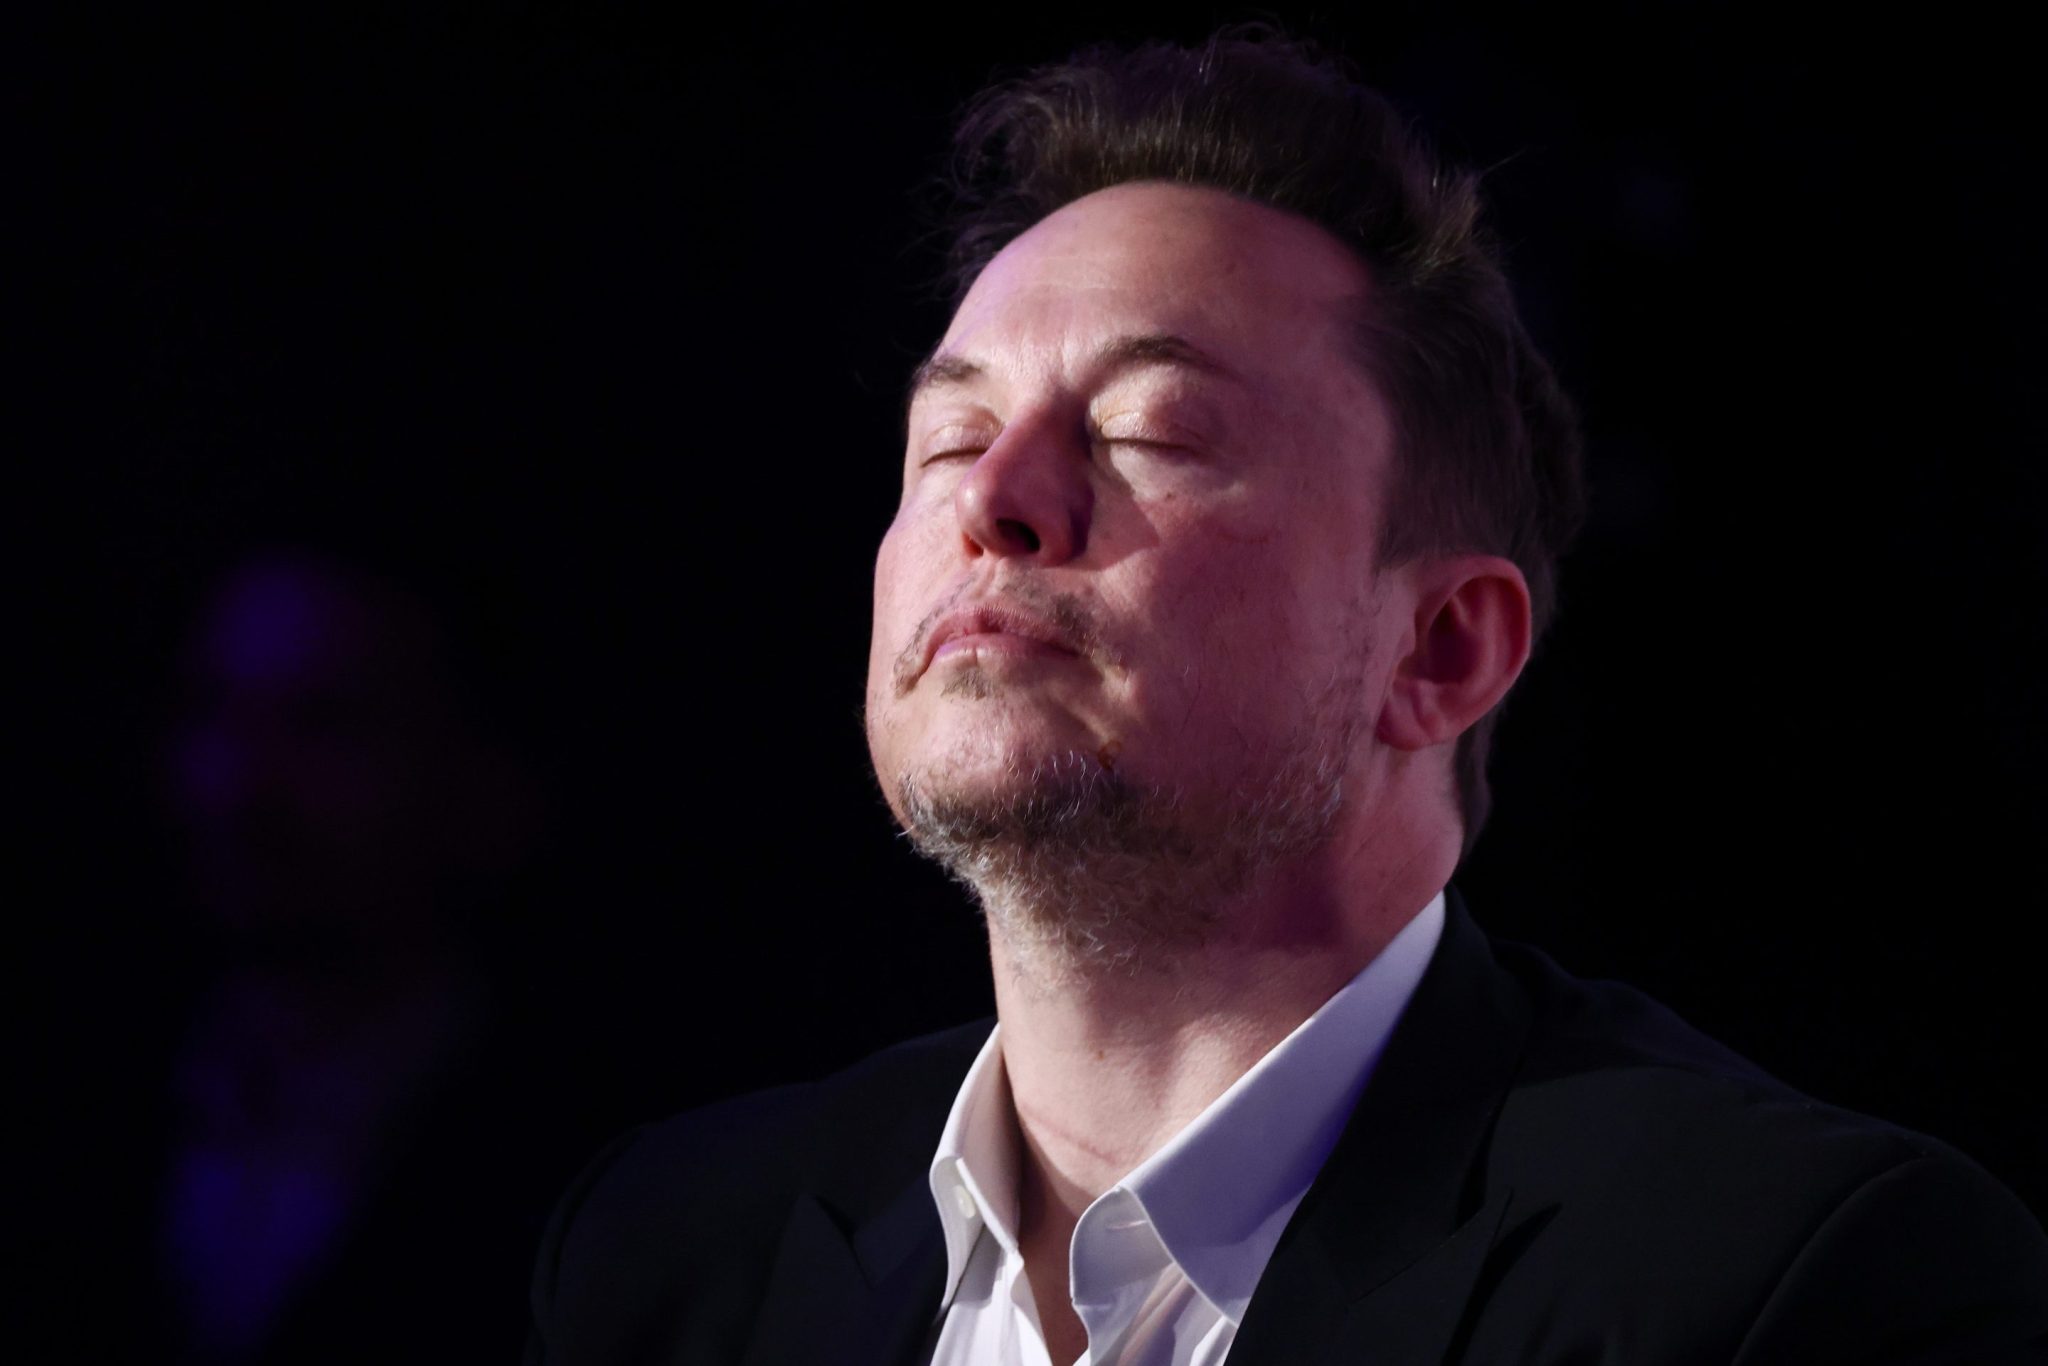 amazon, elon musk says his religion is ‘one of curiosity’ and it’s why he believes ‘we need more humans’ in space